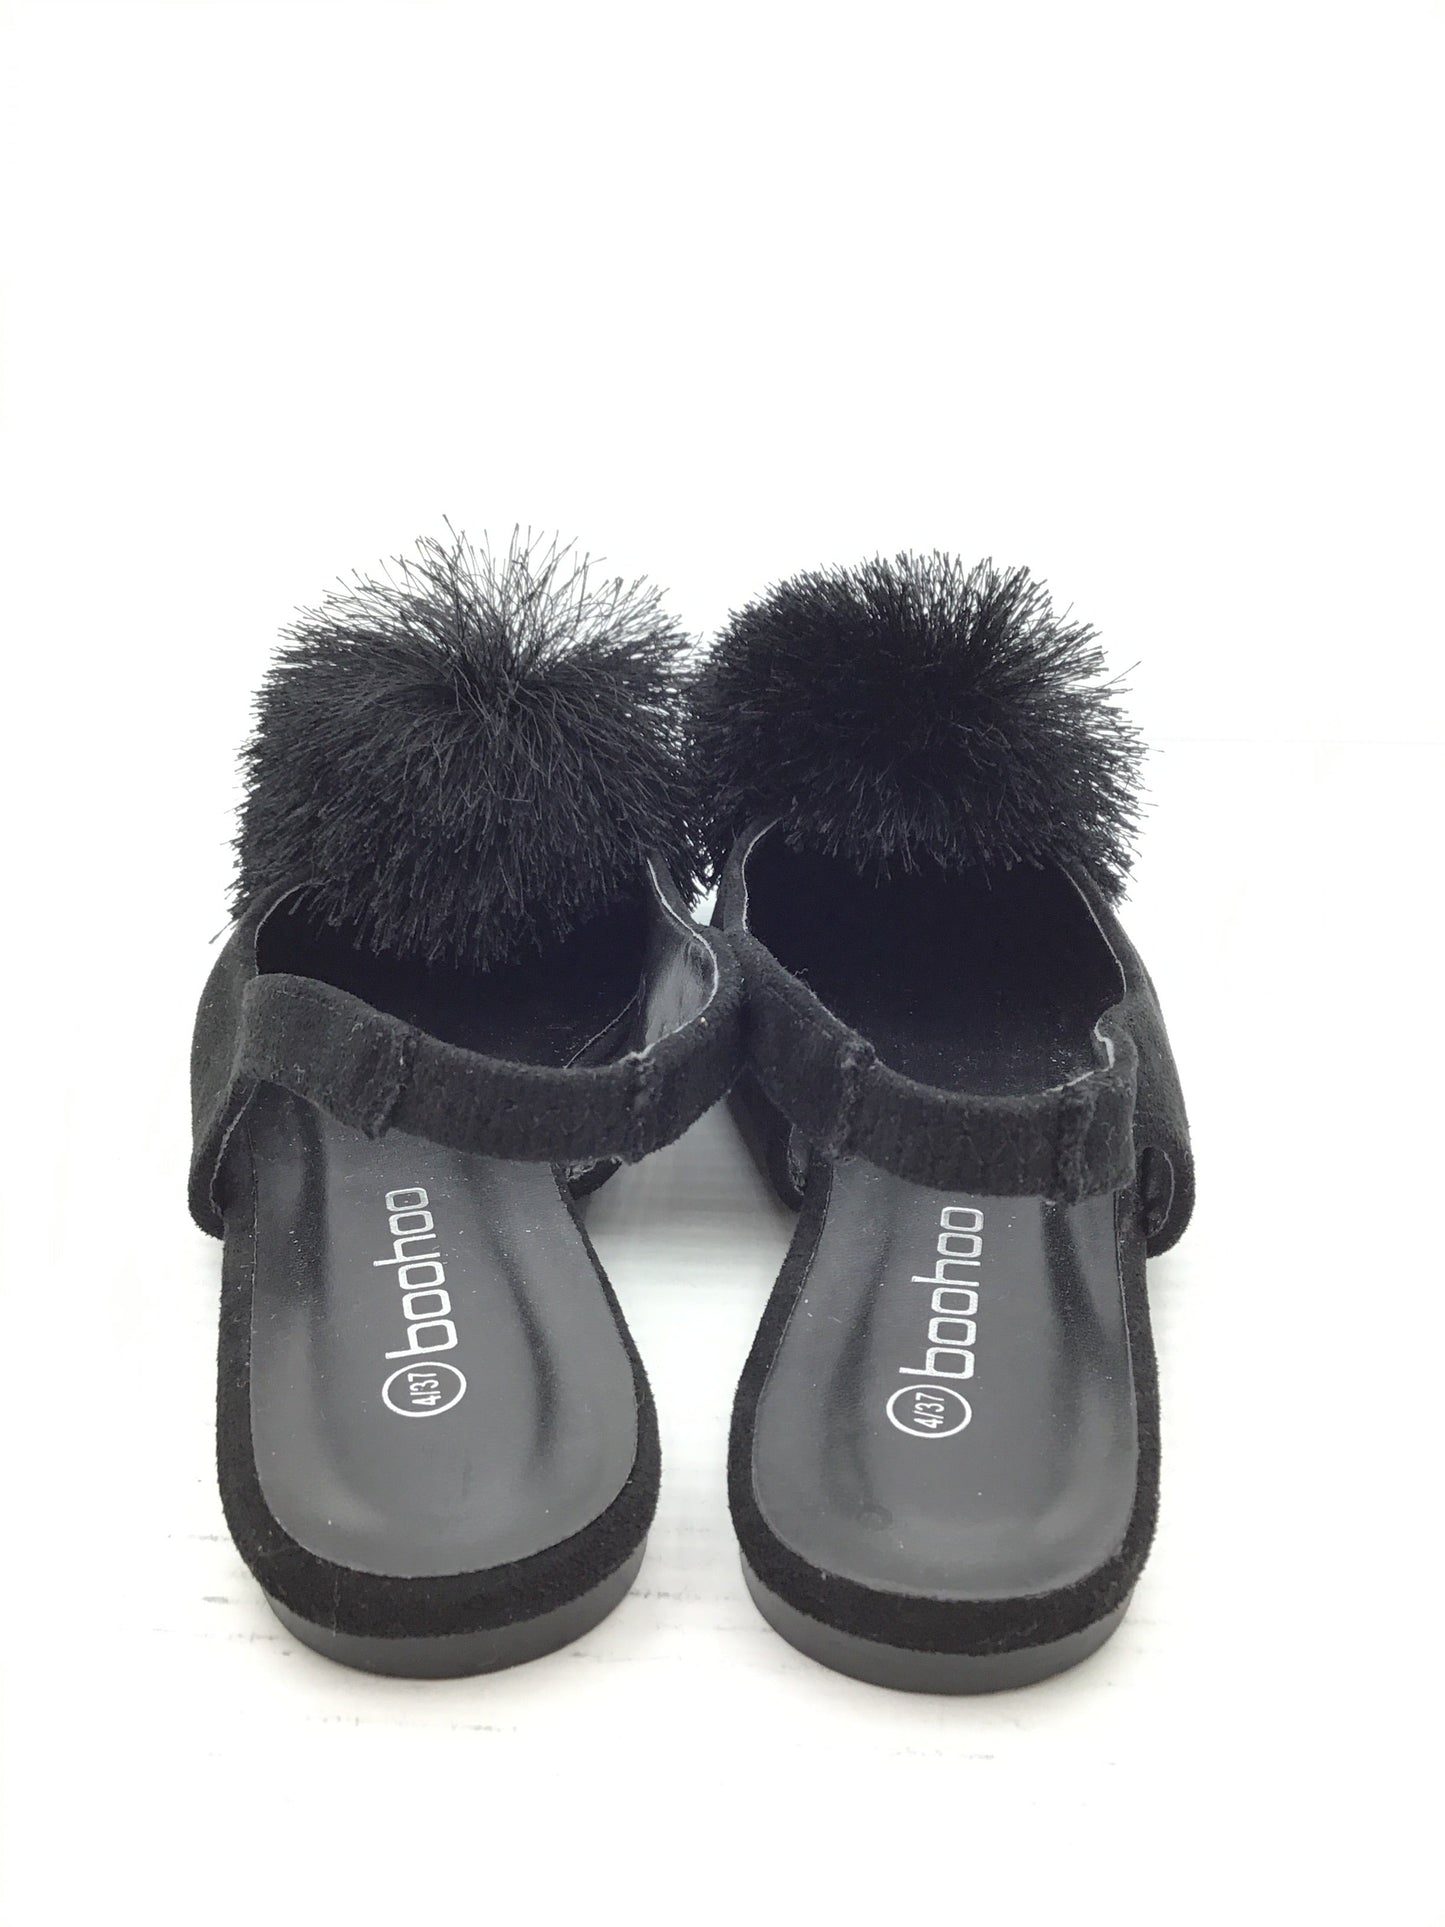 Shoes Flats By Boohoo Boutique  Size: 6.5